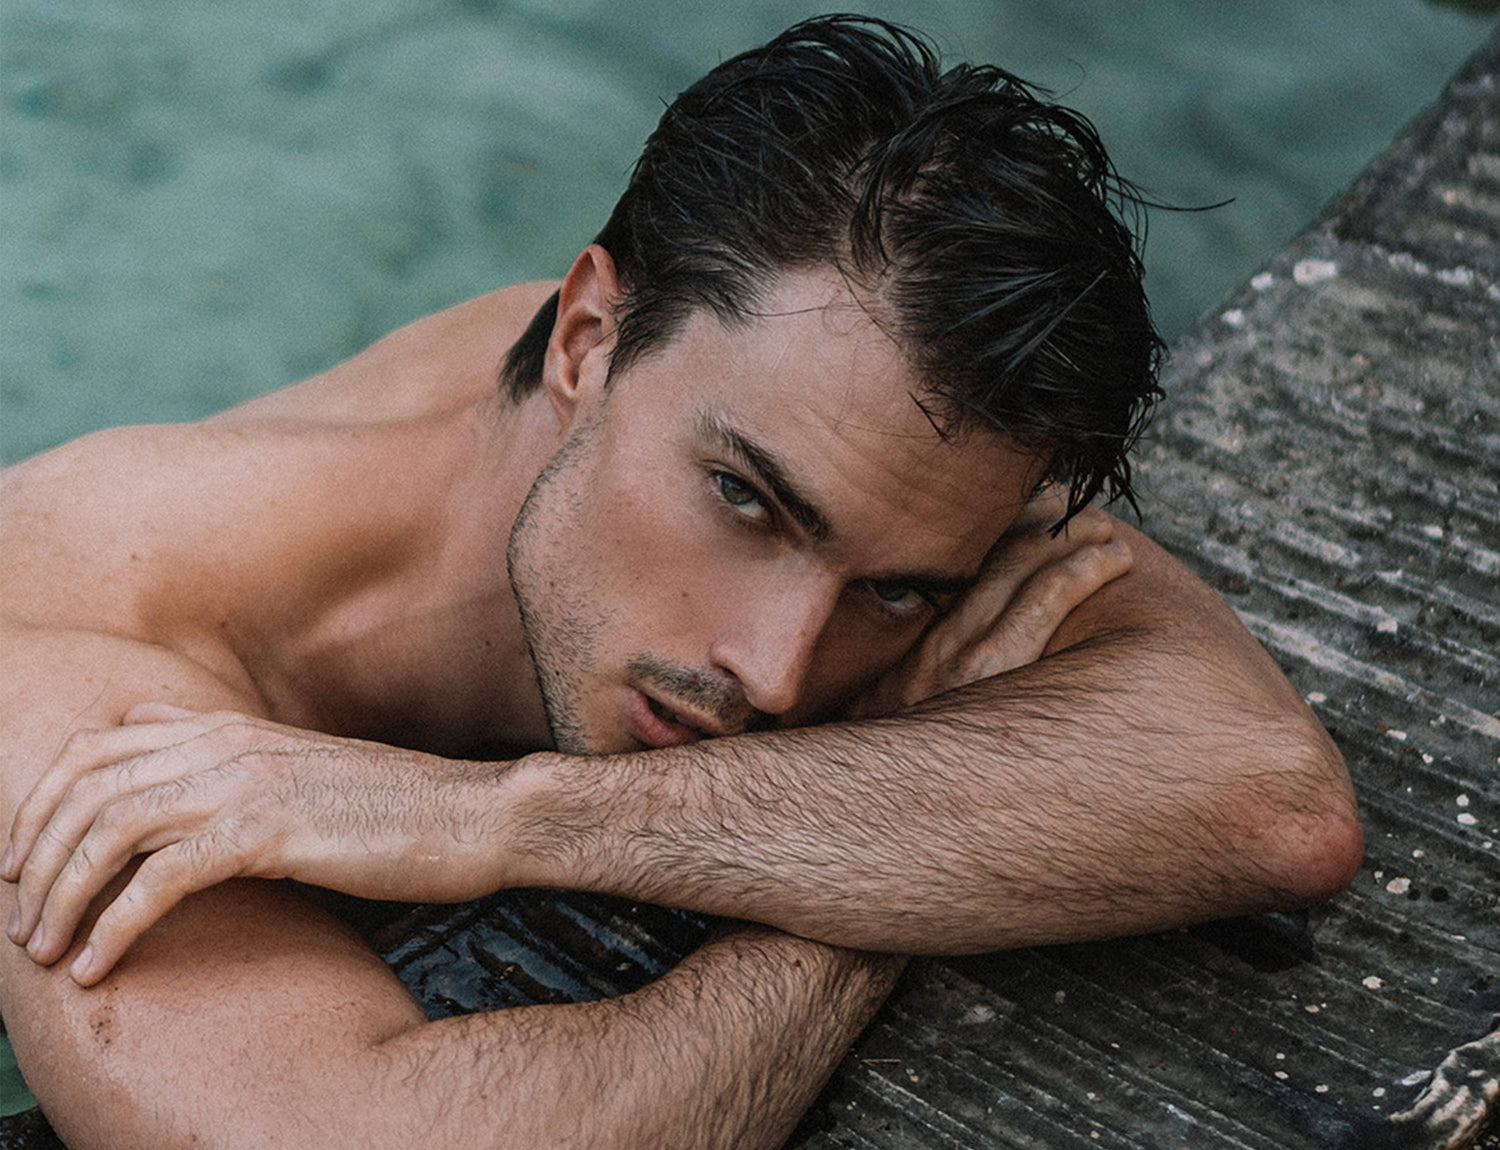 Carlos Arrieta talks with Yummy about his life, his interests, and ambitions - and his passions